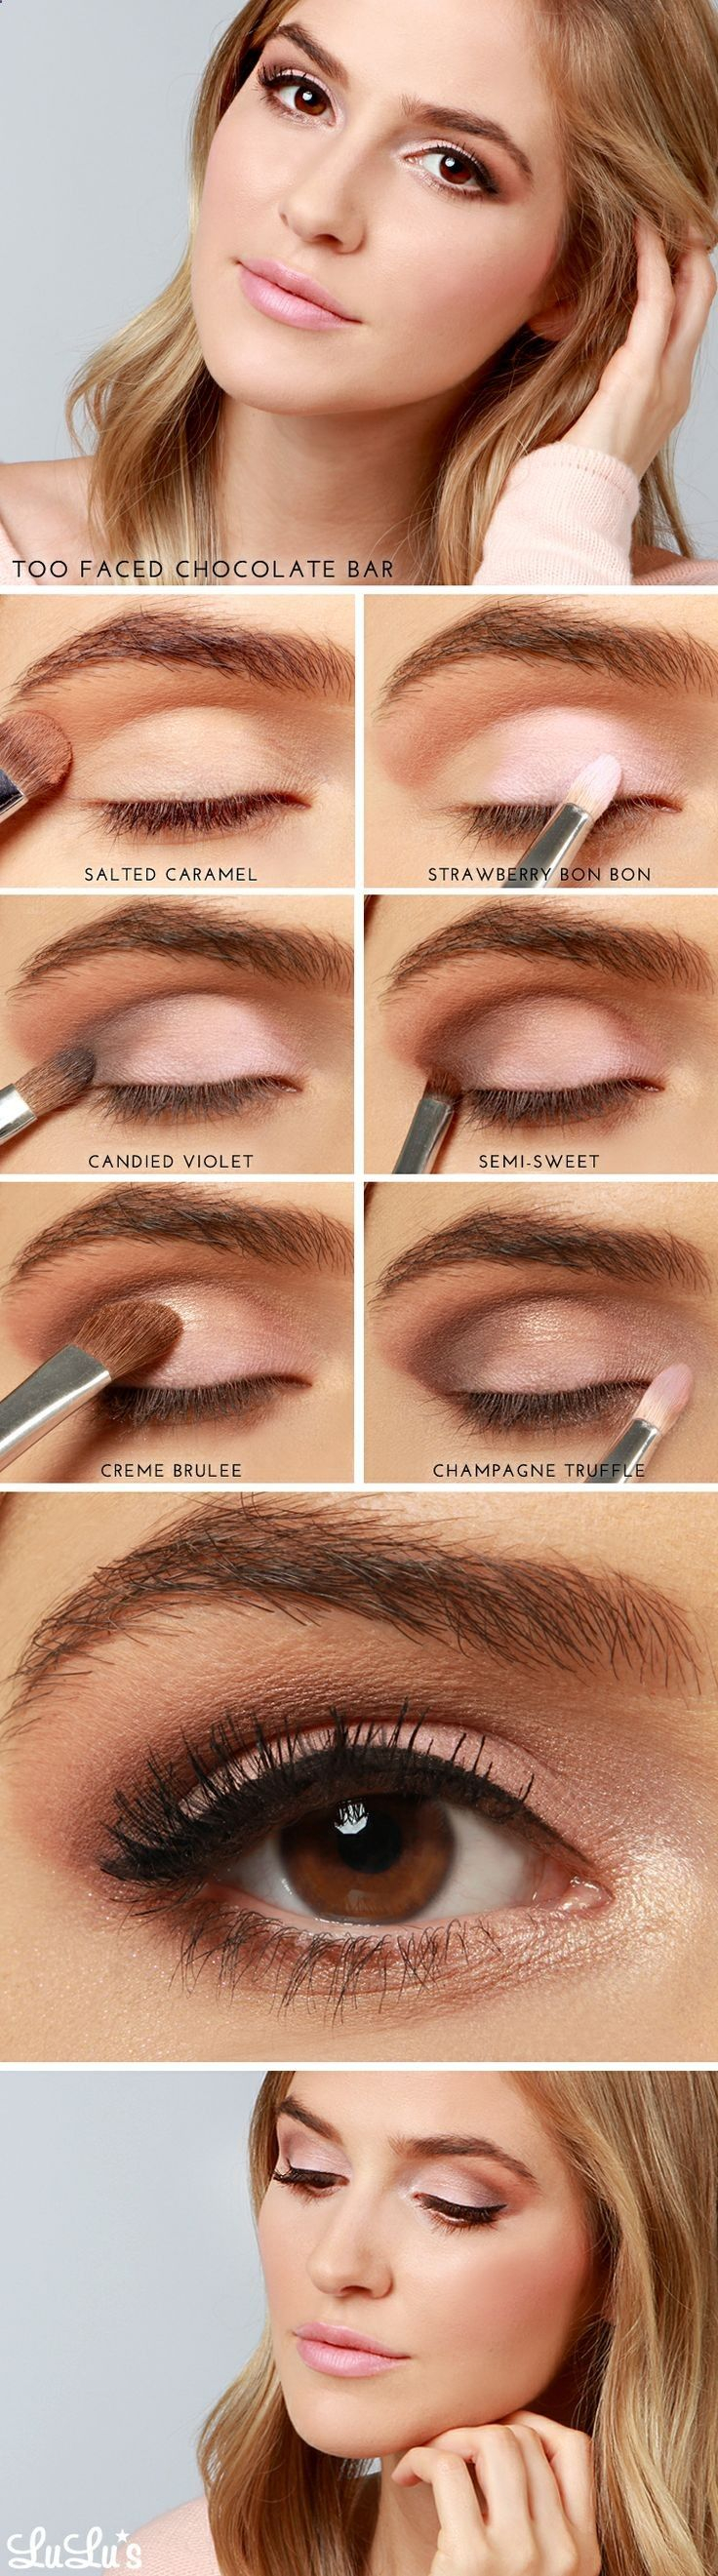 Pretty Makeup For Brown Eyes 27 Pretty Makeup Tutorials For Brown Eyes Styles Weekly